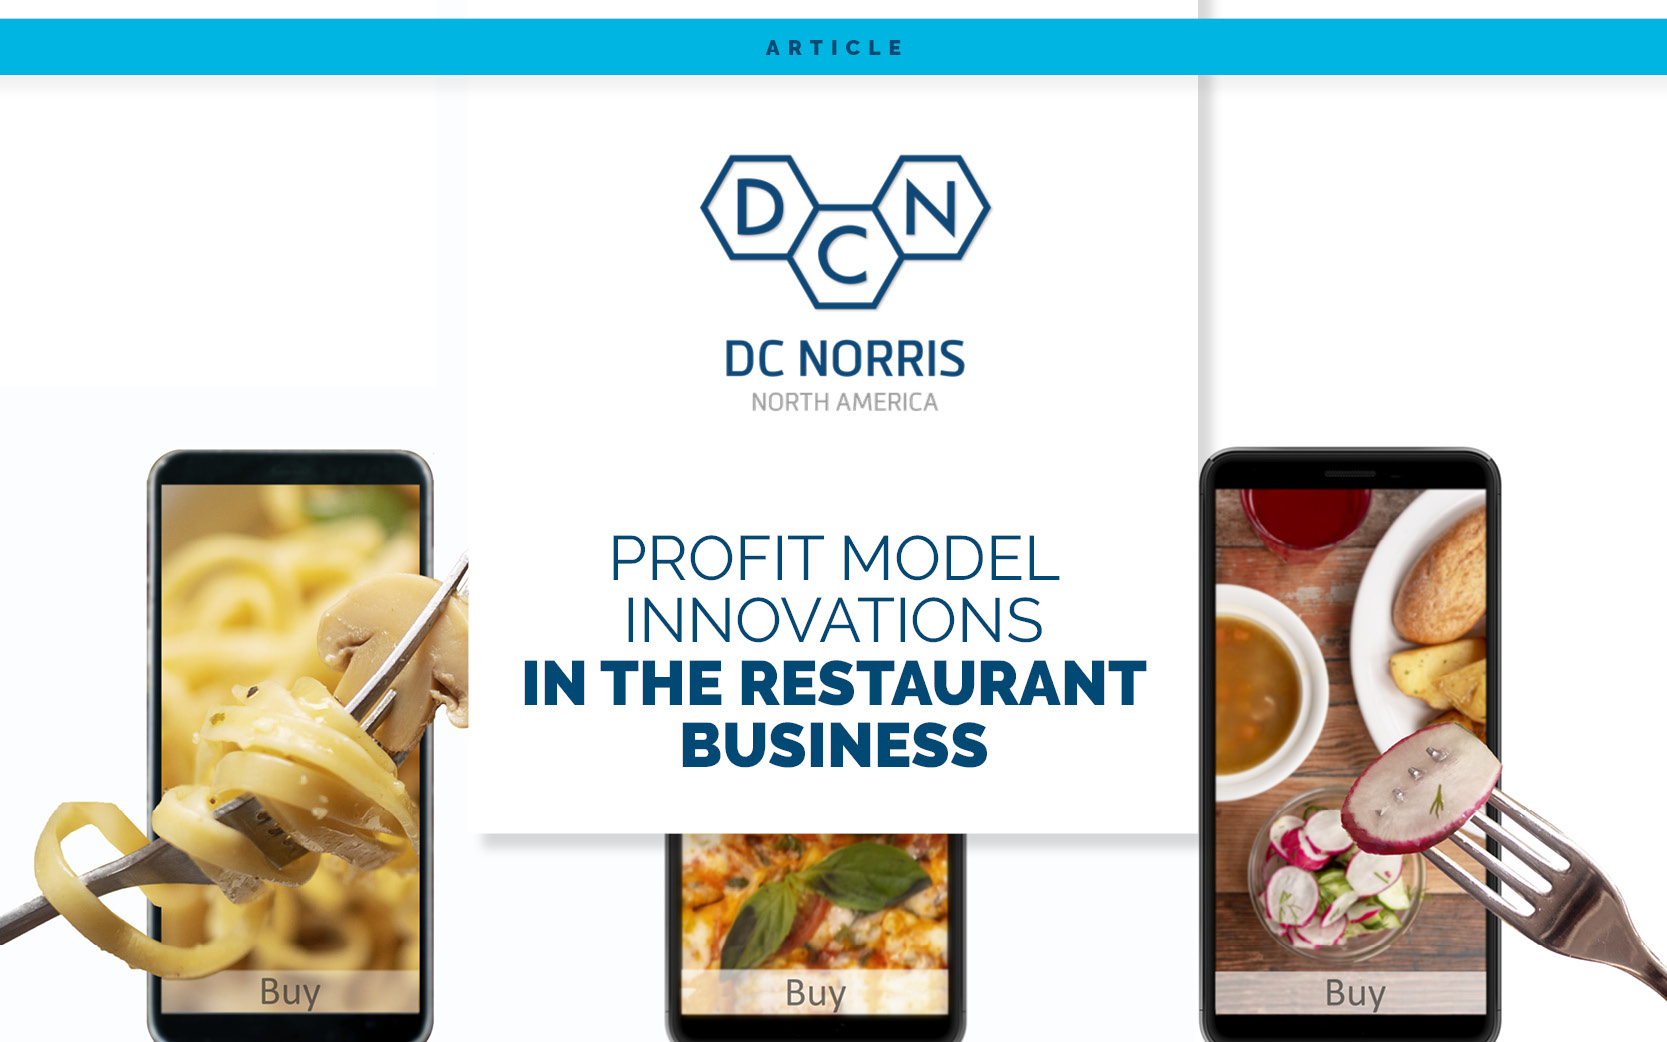 an image of food on cell phone screens with a call to 'buy now' showcasing the Profit Model Innovations in the Restaurant Business. Below the DC Norris North America logo.